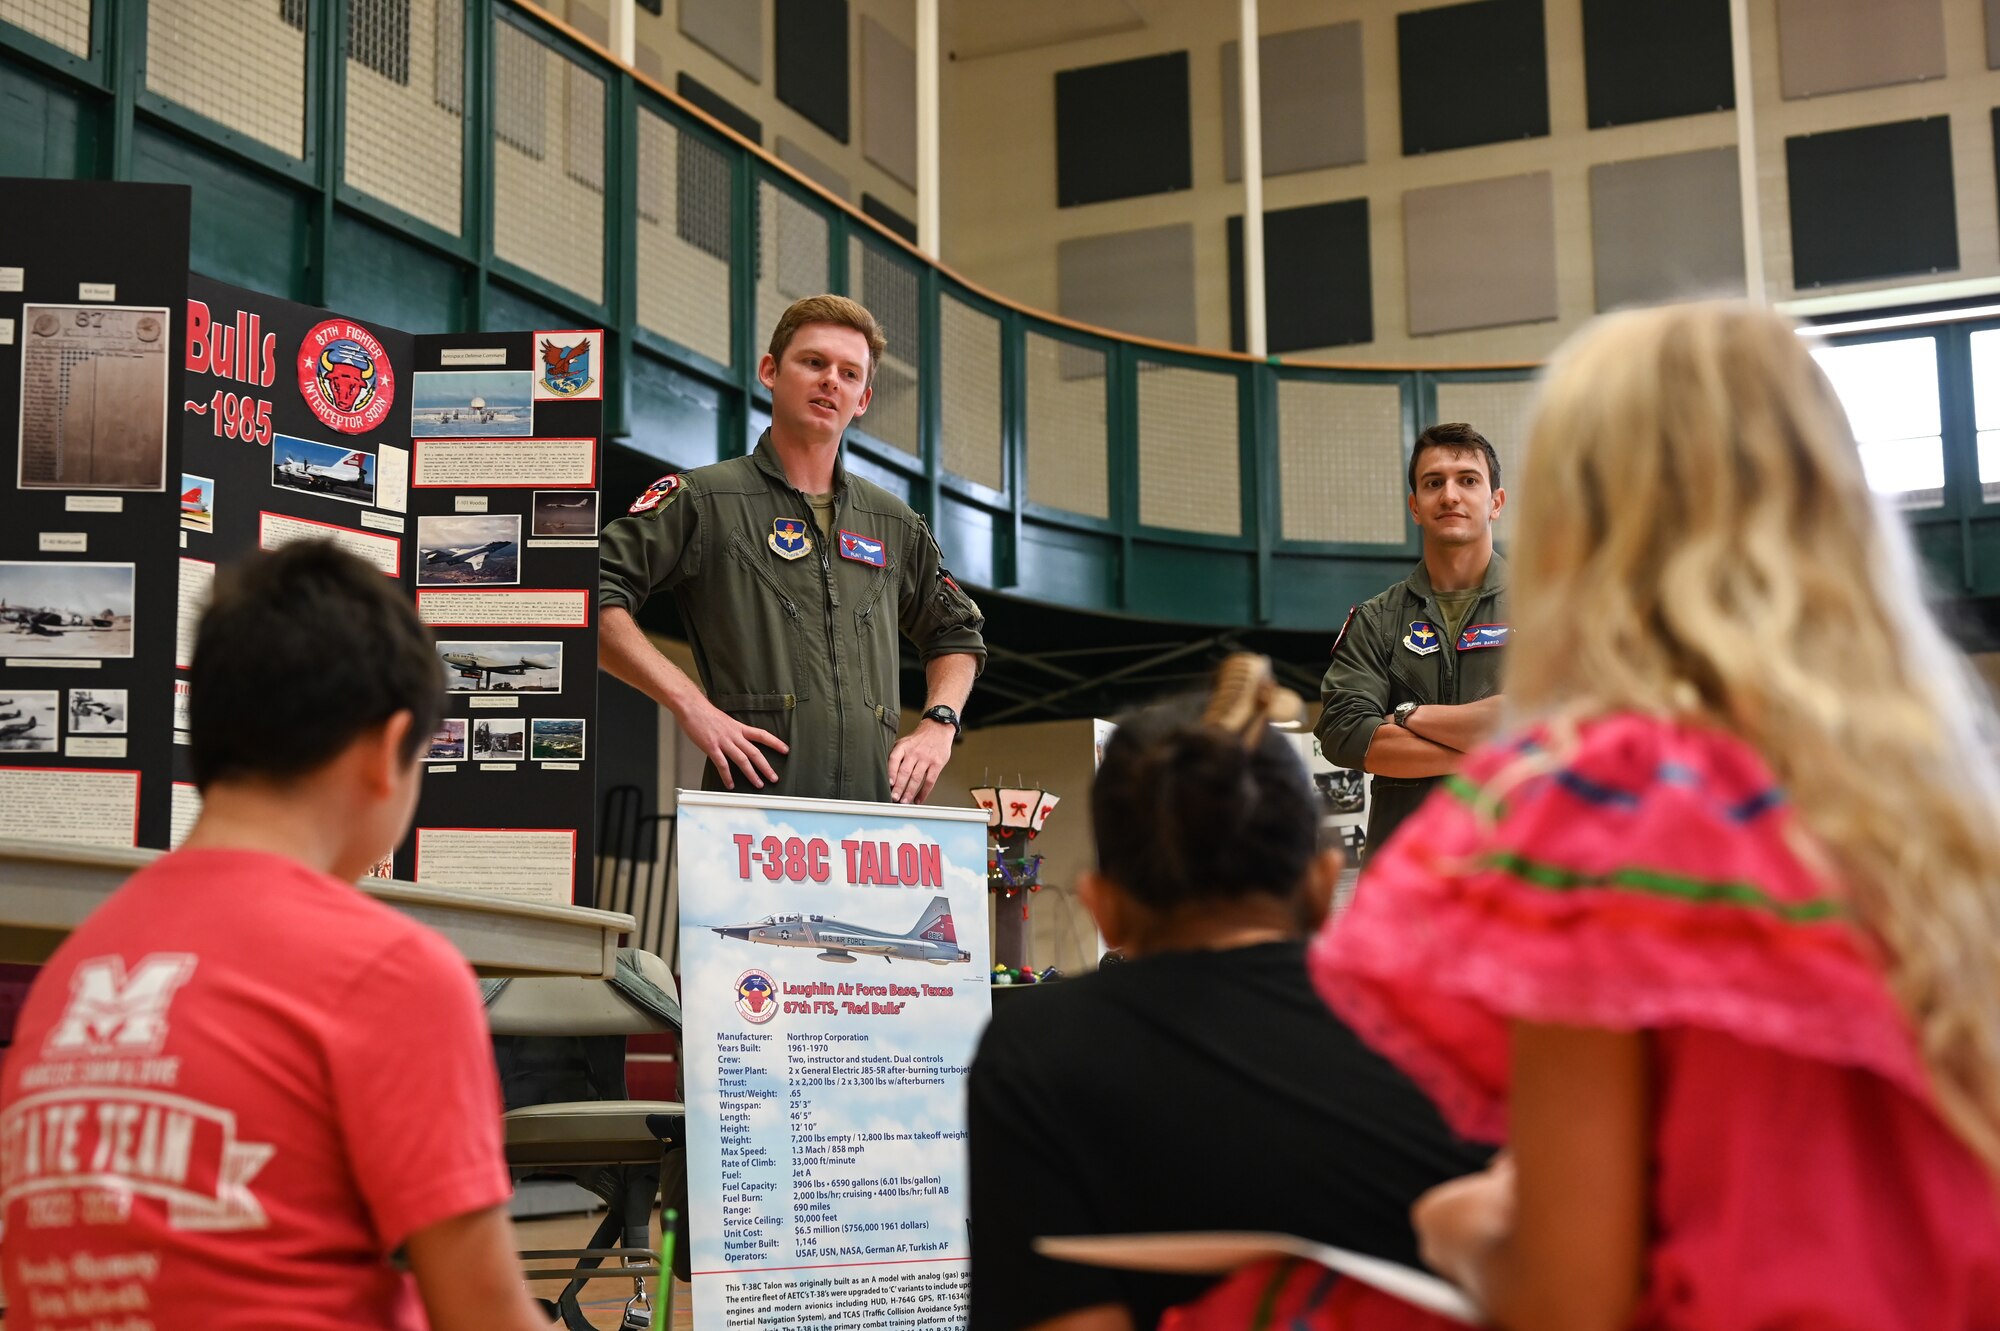 The event offered interactive displays and engaging activities to inspire students to consider diverse career paths.